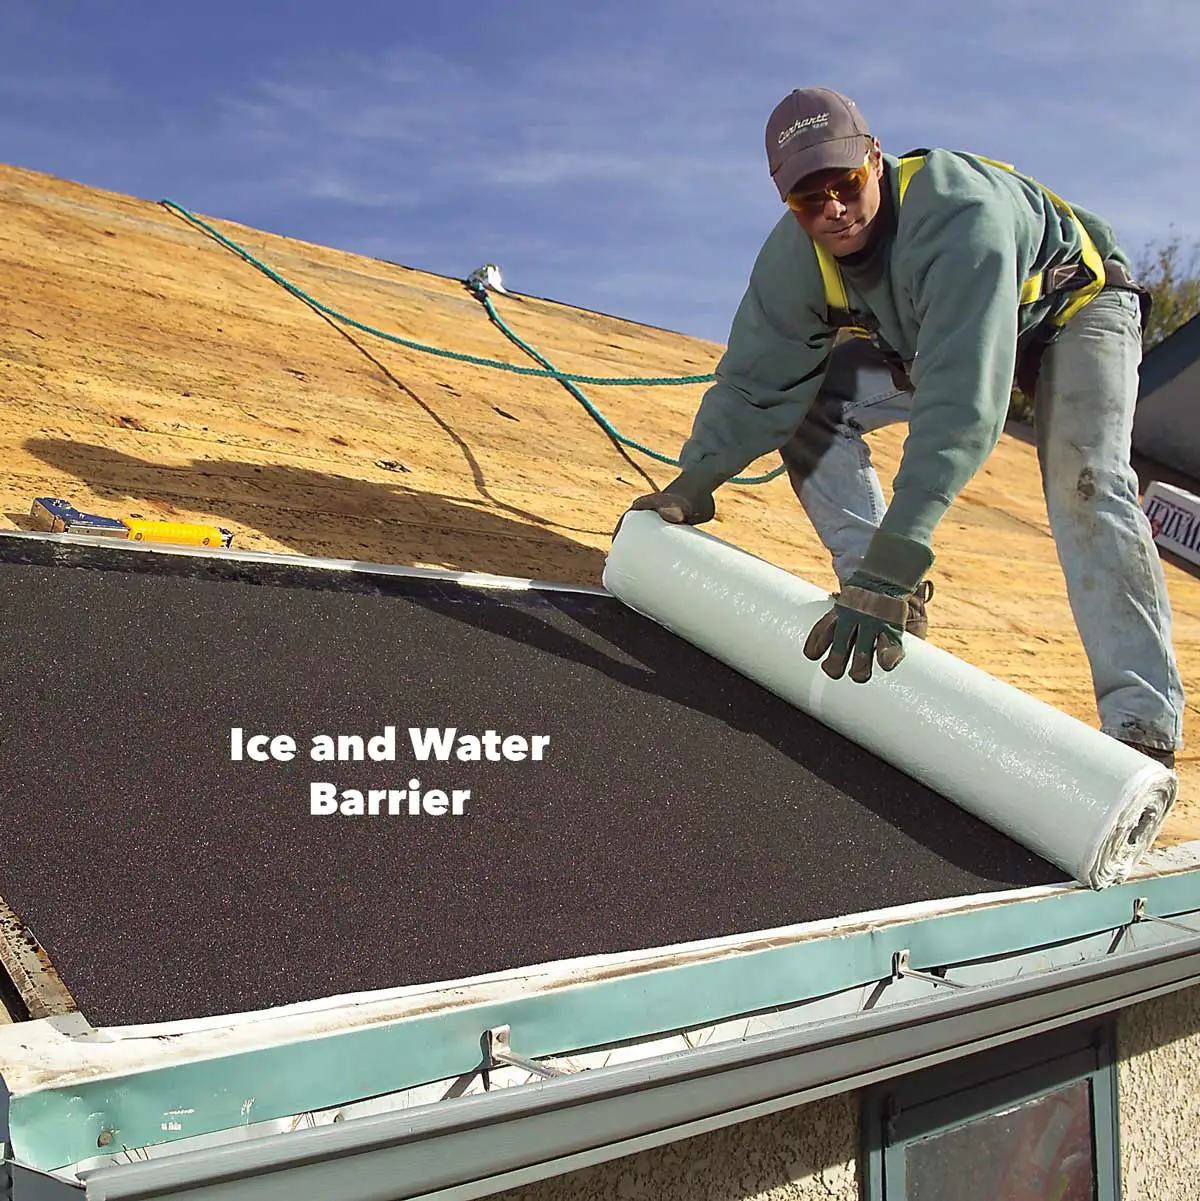 Ice and Water Shield: Why Is It Important?